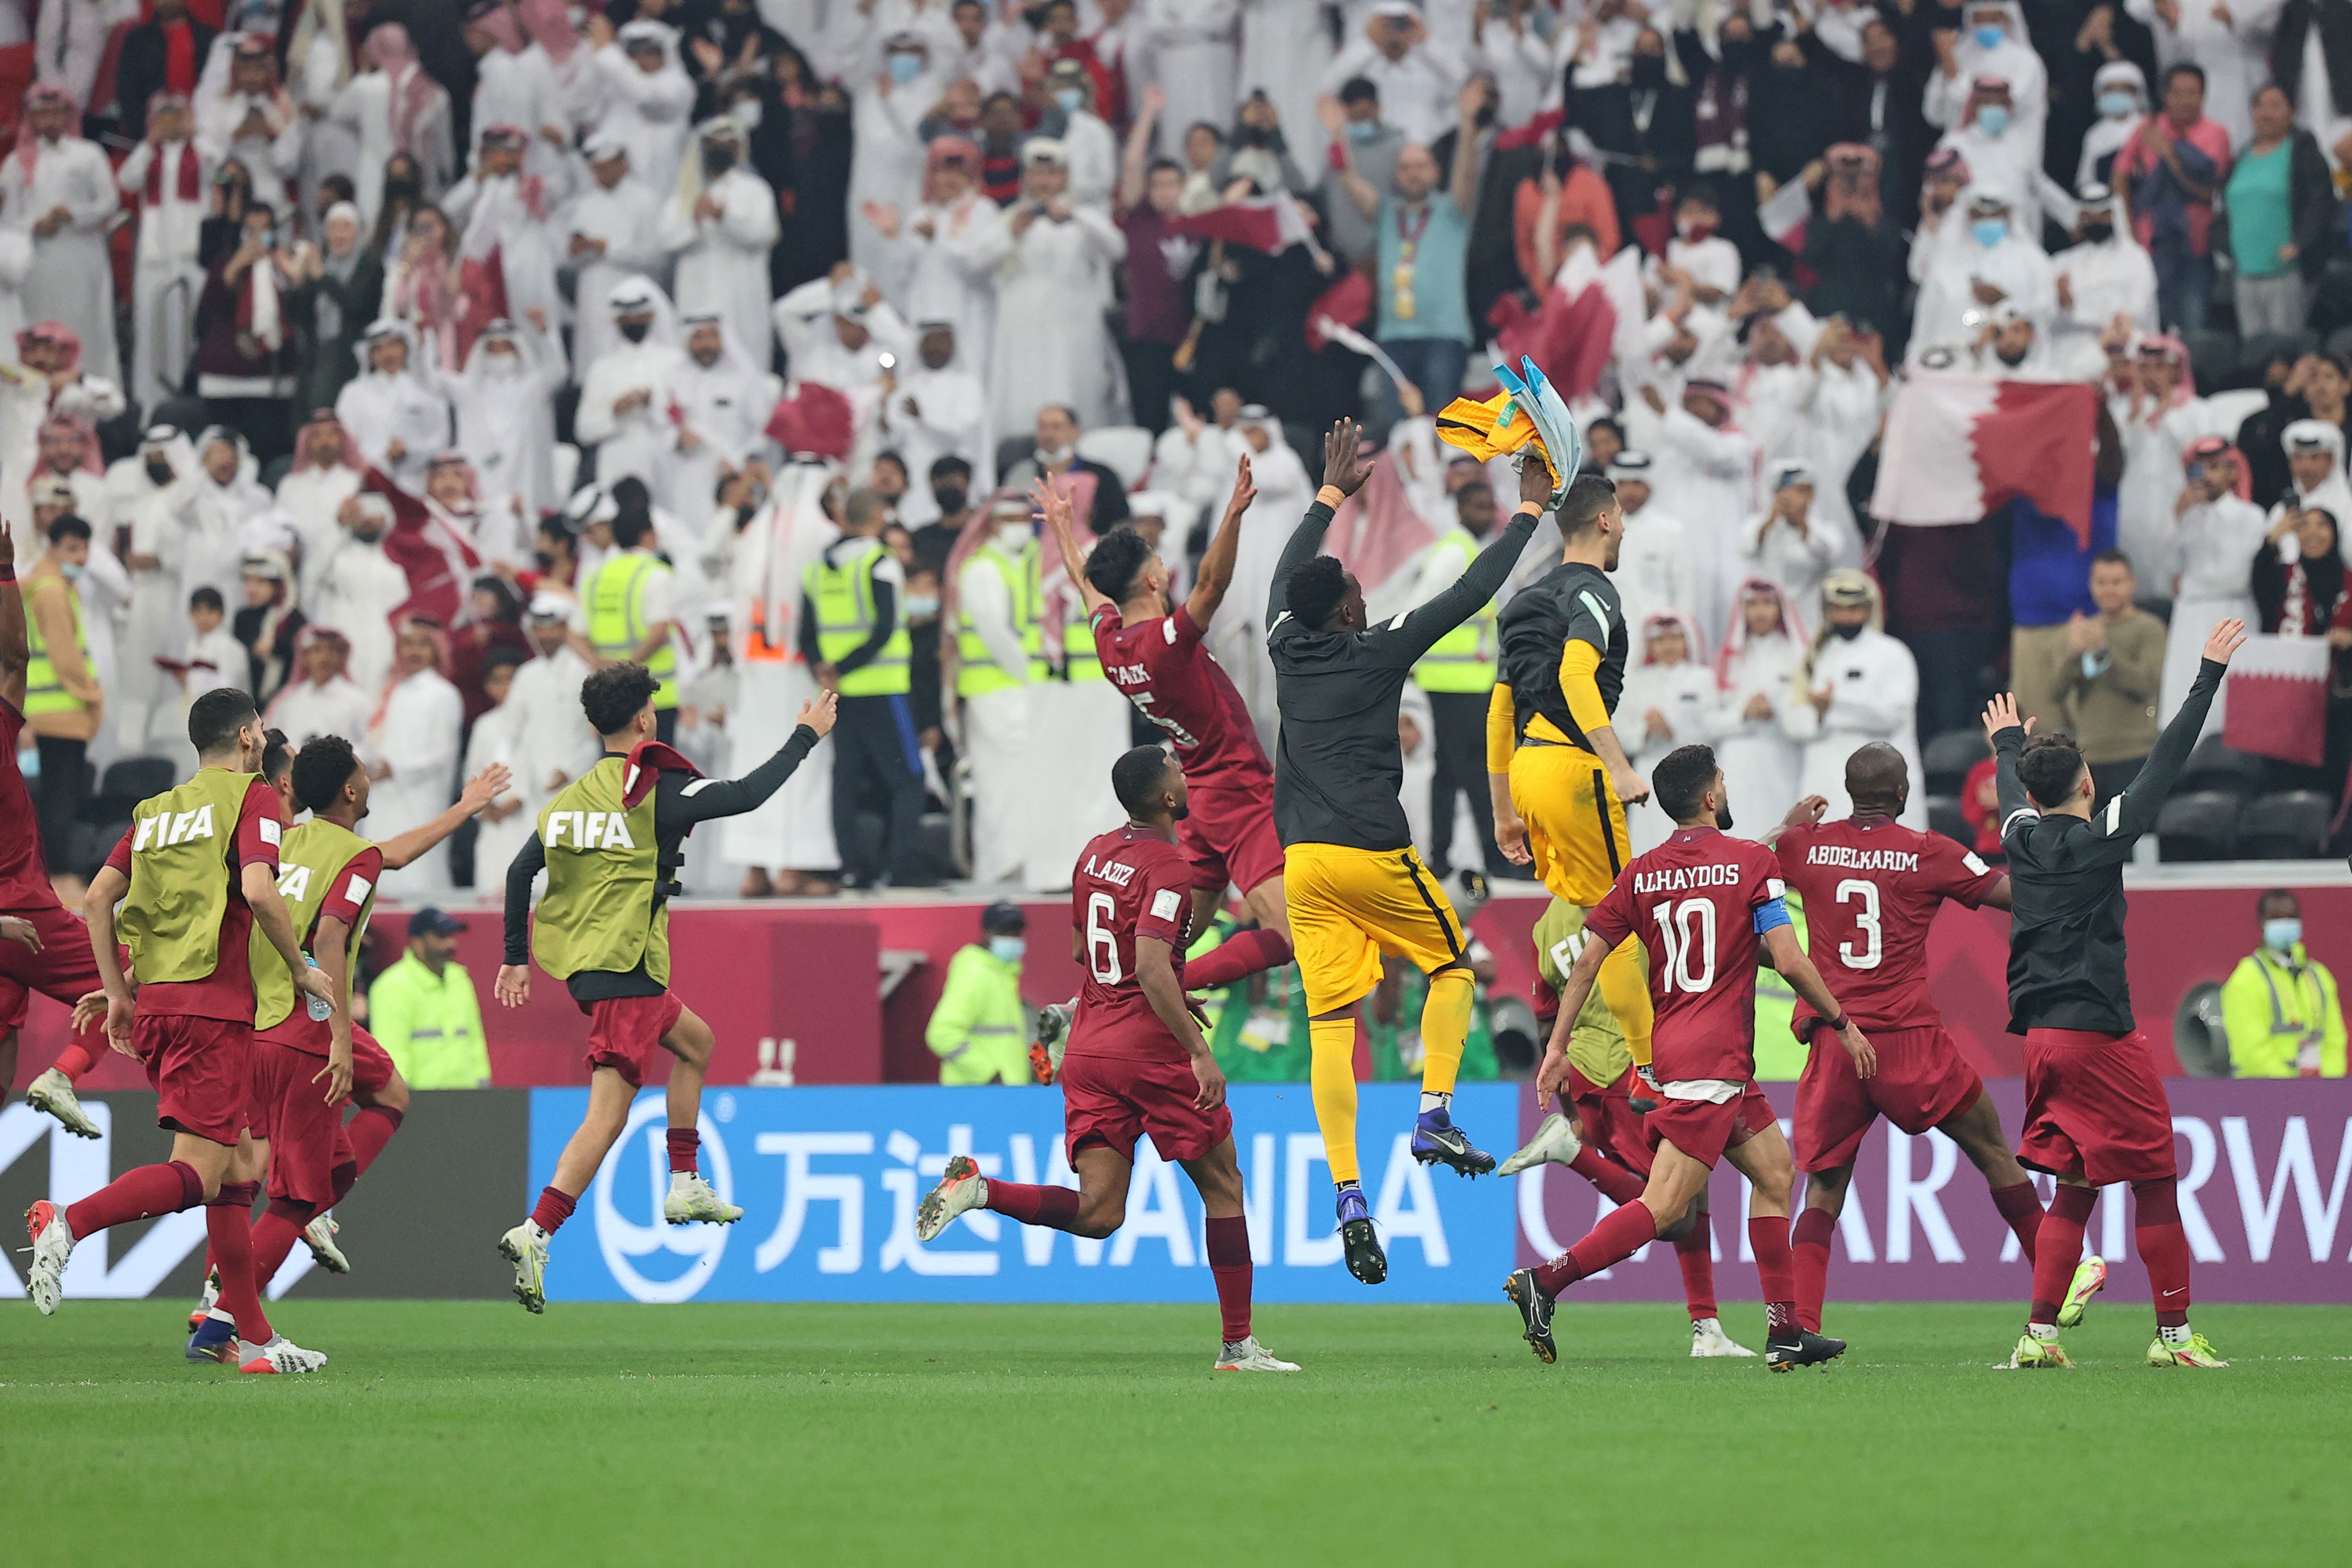 Qatar's players celebrate after beating the UAE in the 2021 Arab Cup quarterfinals.